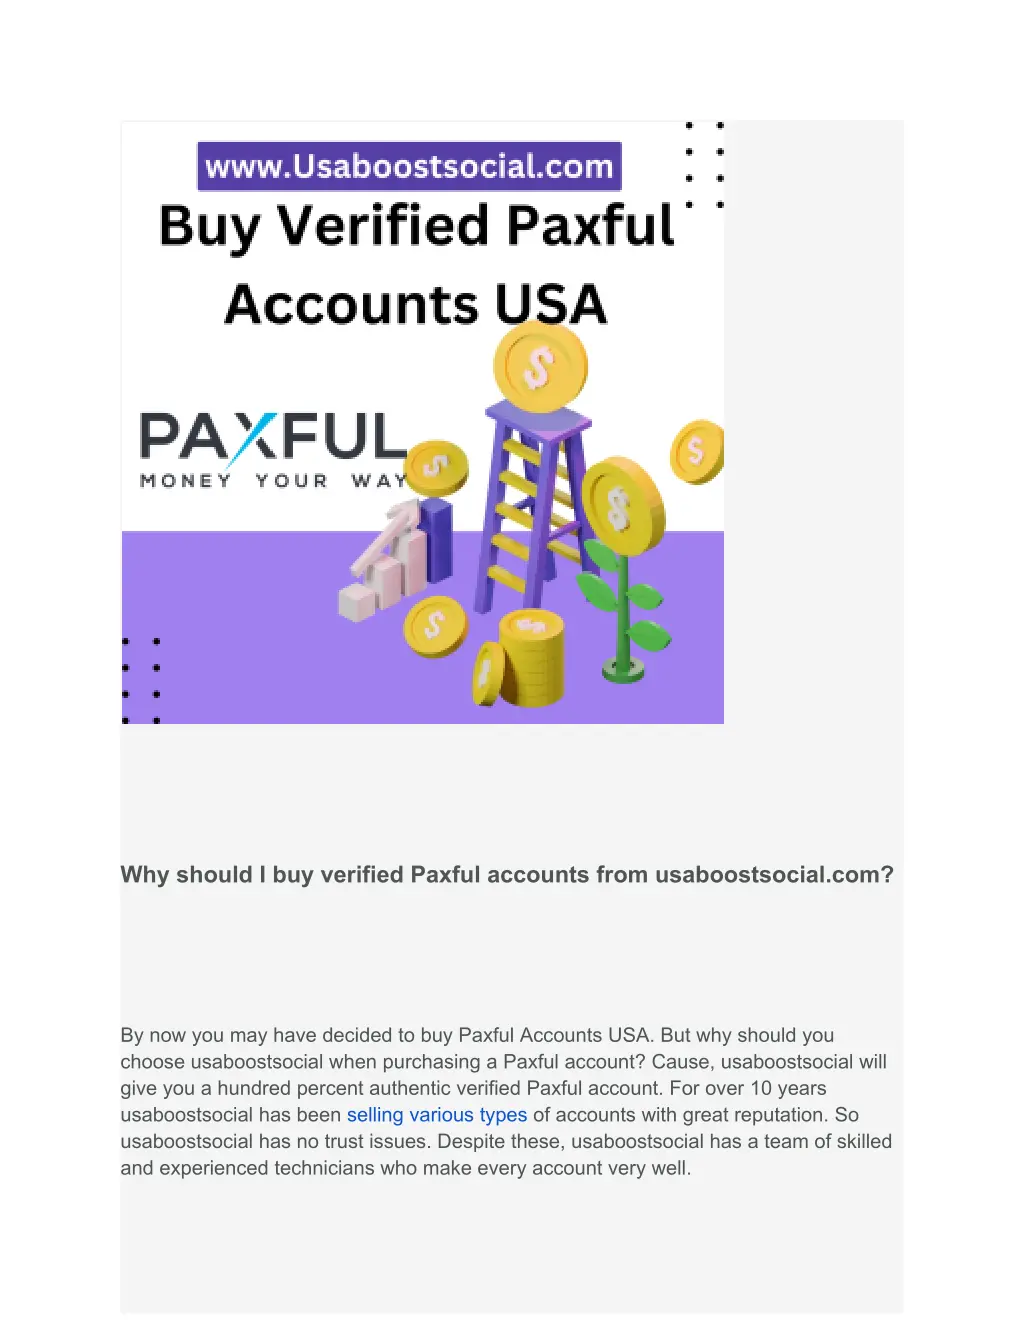 why should i buy verified paxful accounts from